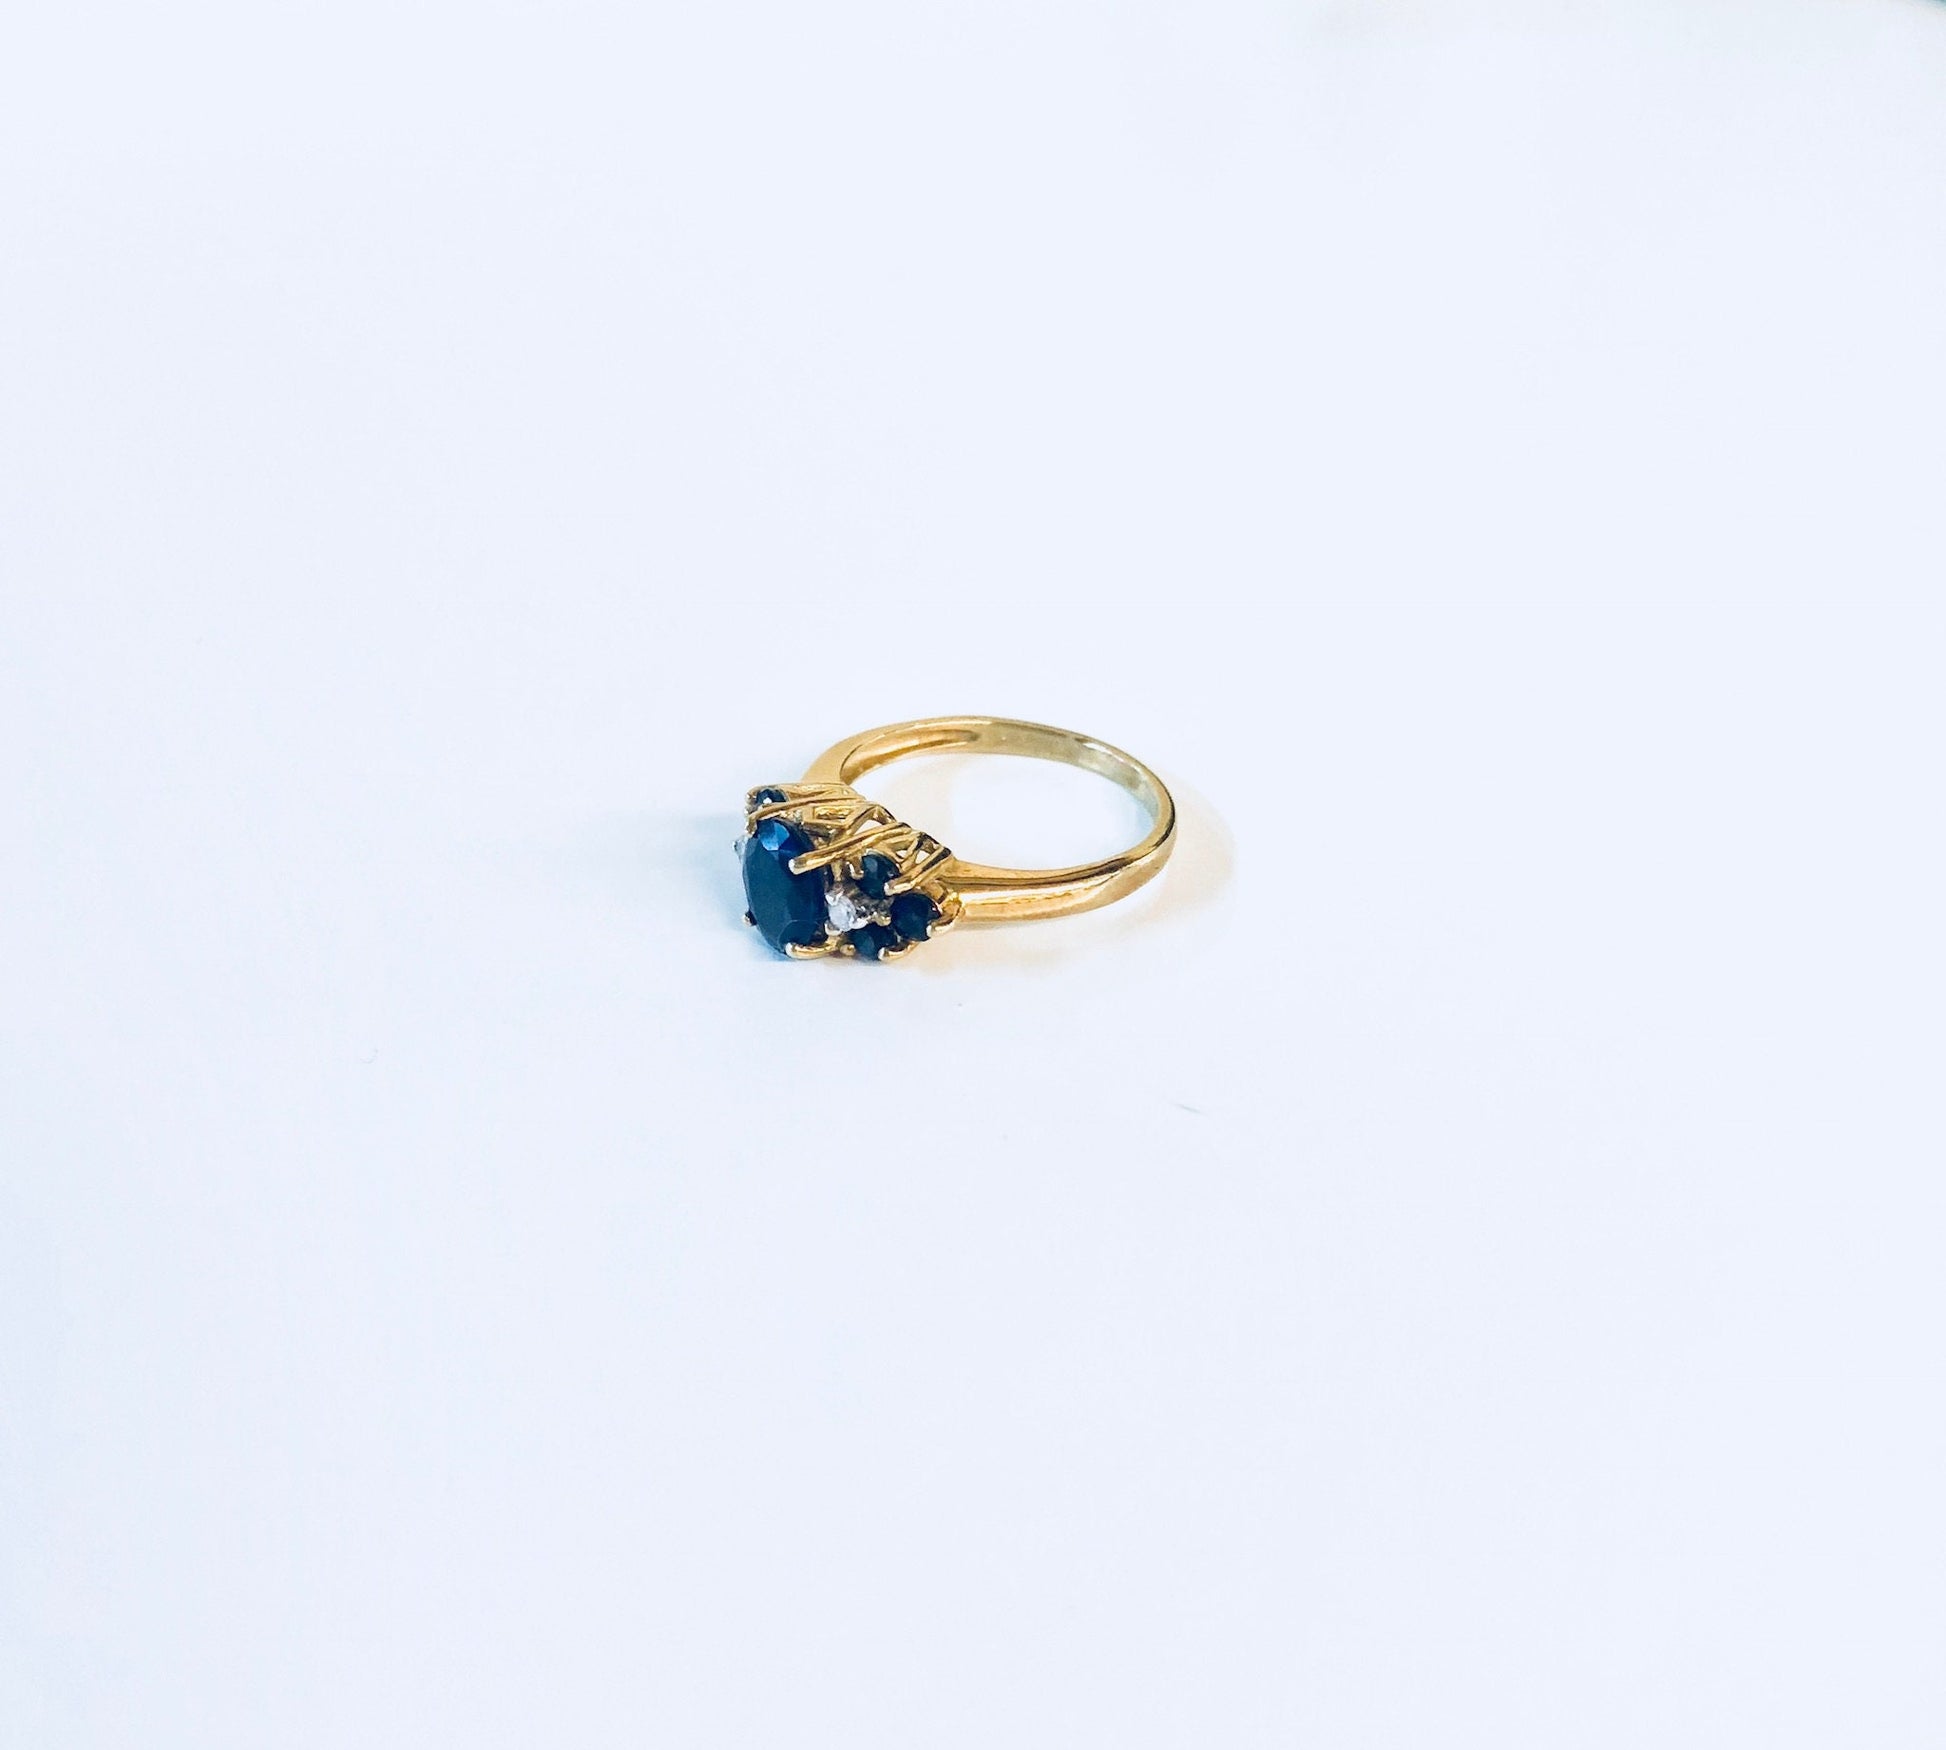 Vintage 14K yellow gold sapphire ring with three blue sapphire stones set in a row on a simple gold band, perfect for an engagement ring, wedding band, or September birthstone jewelry.